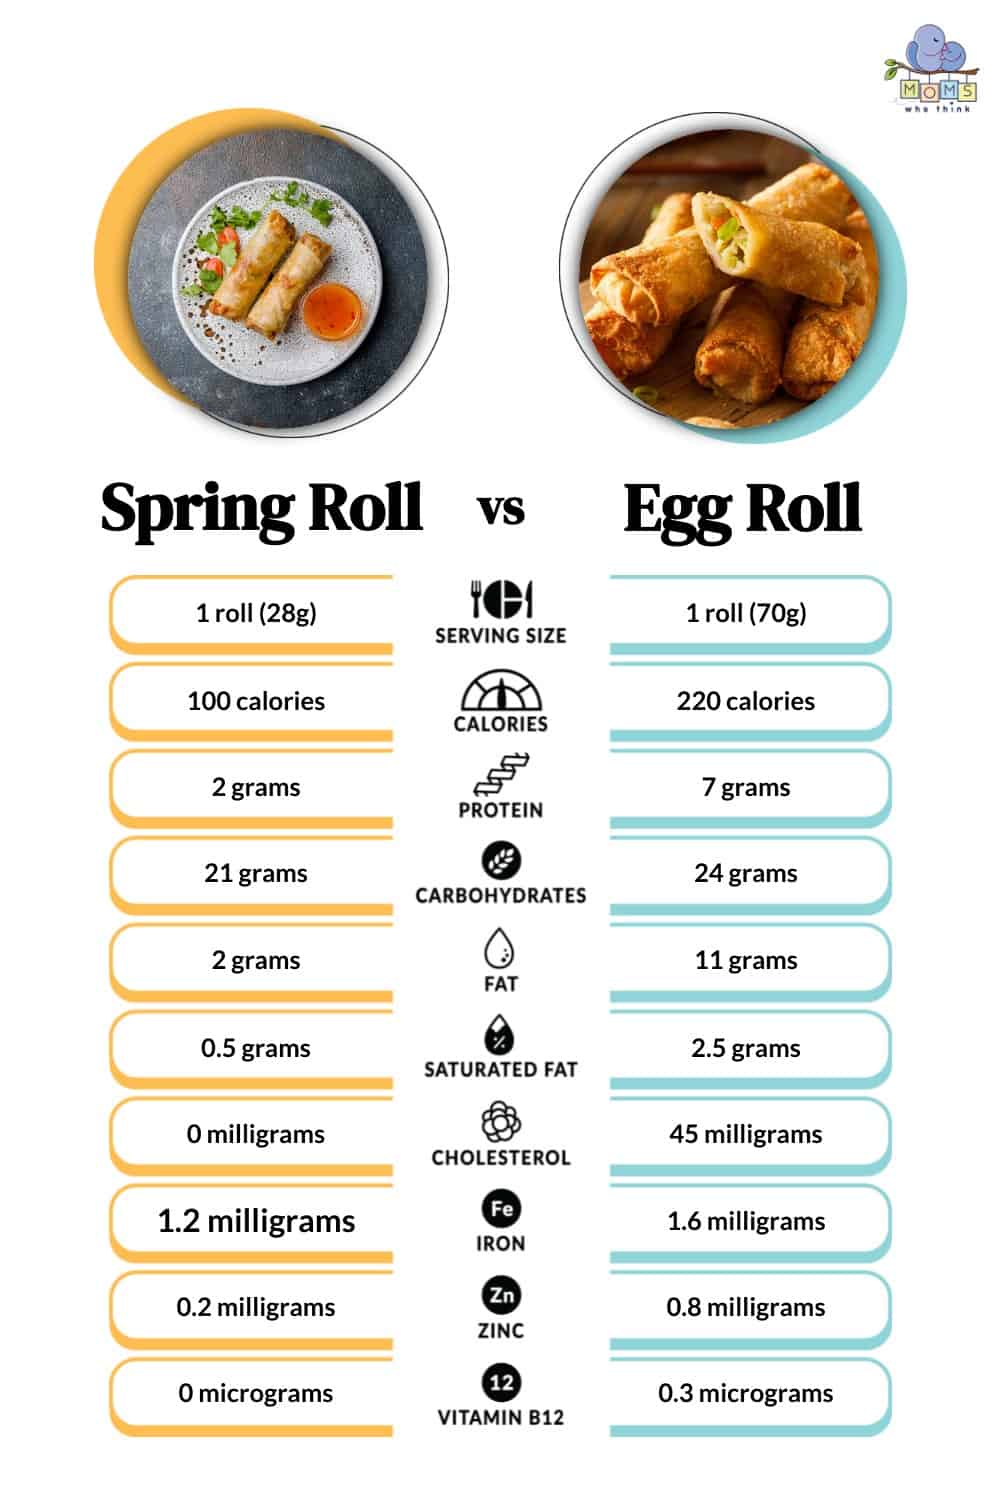 Spring Roll vs Egg Roll Nutritional Facts